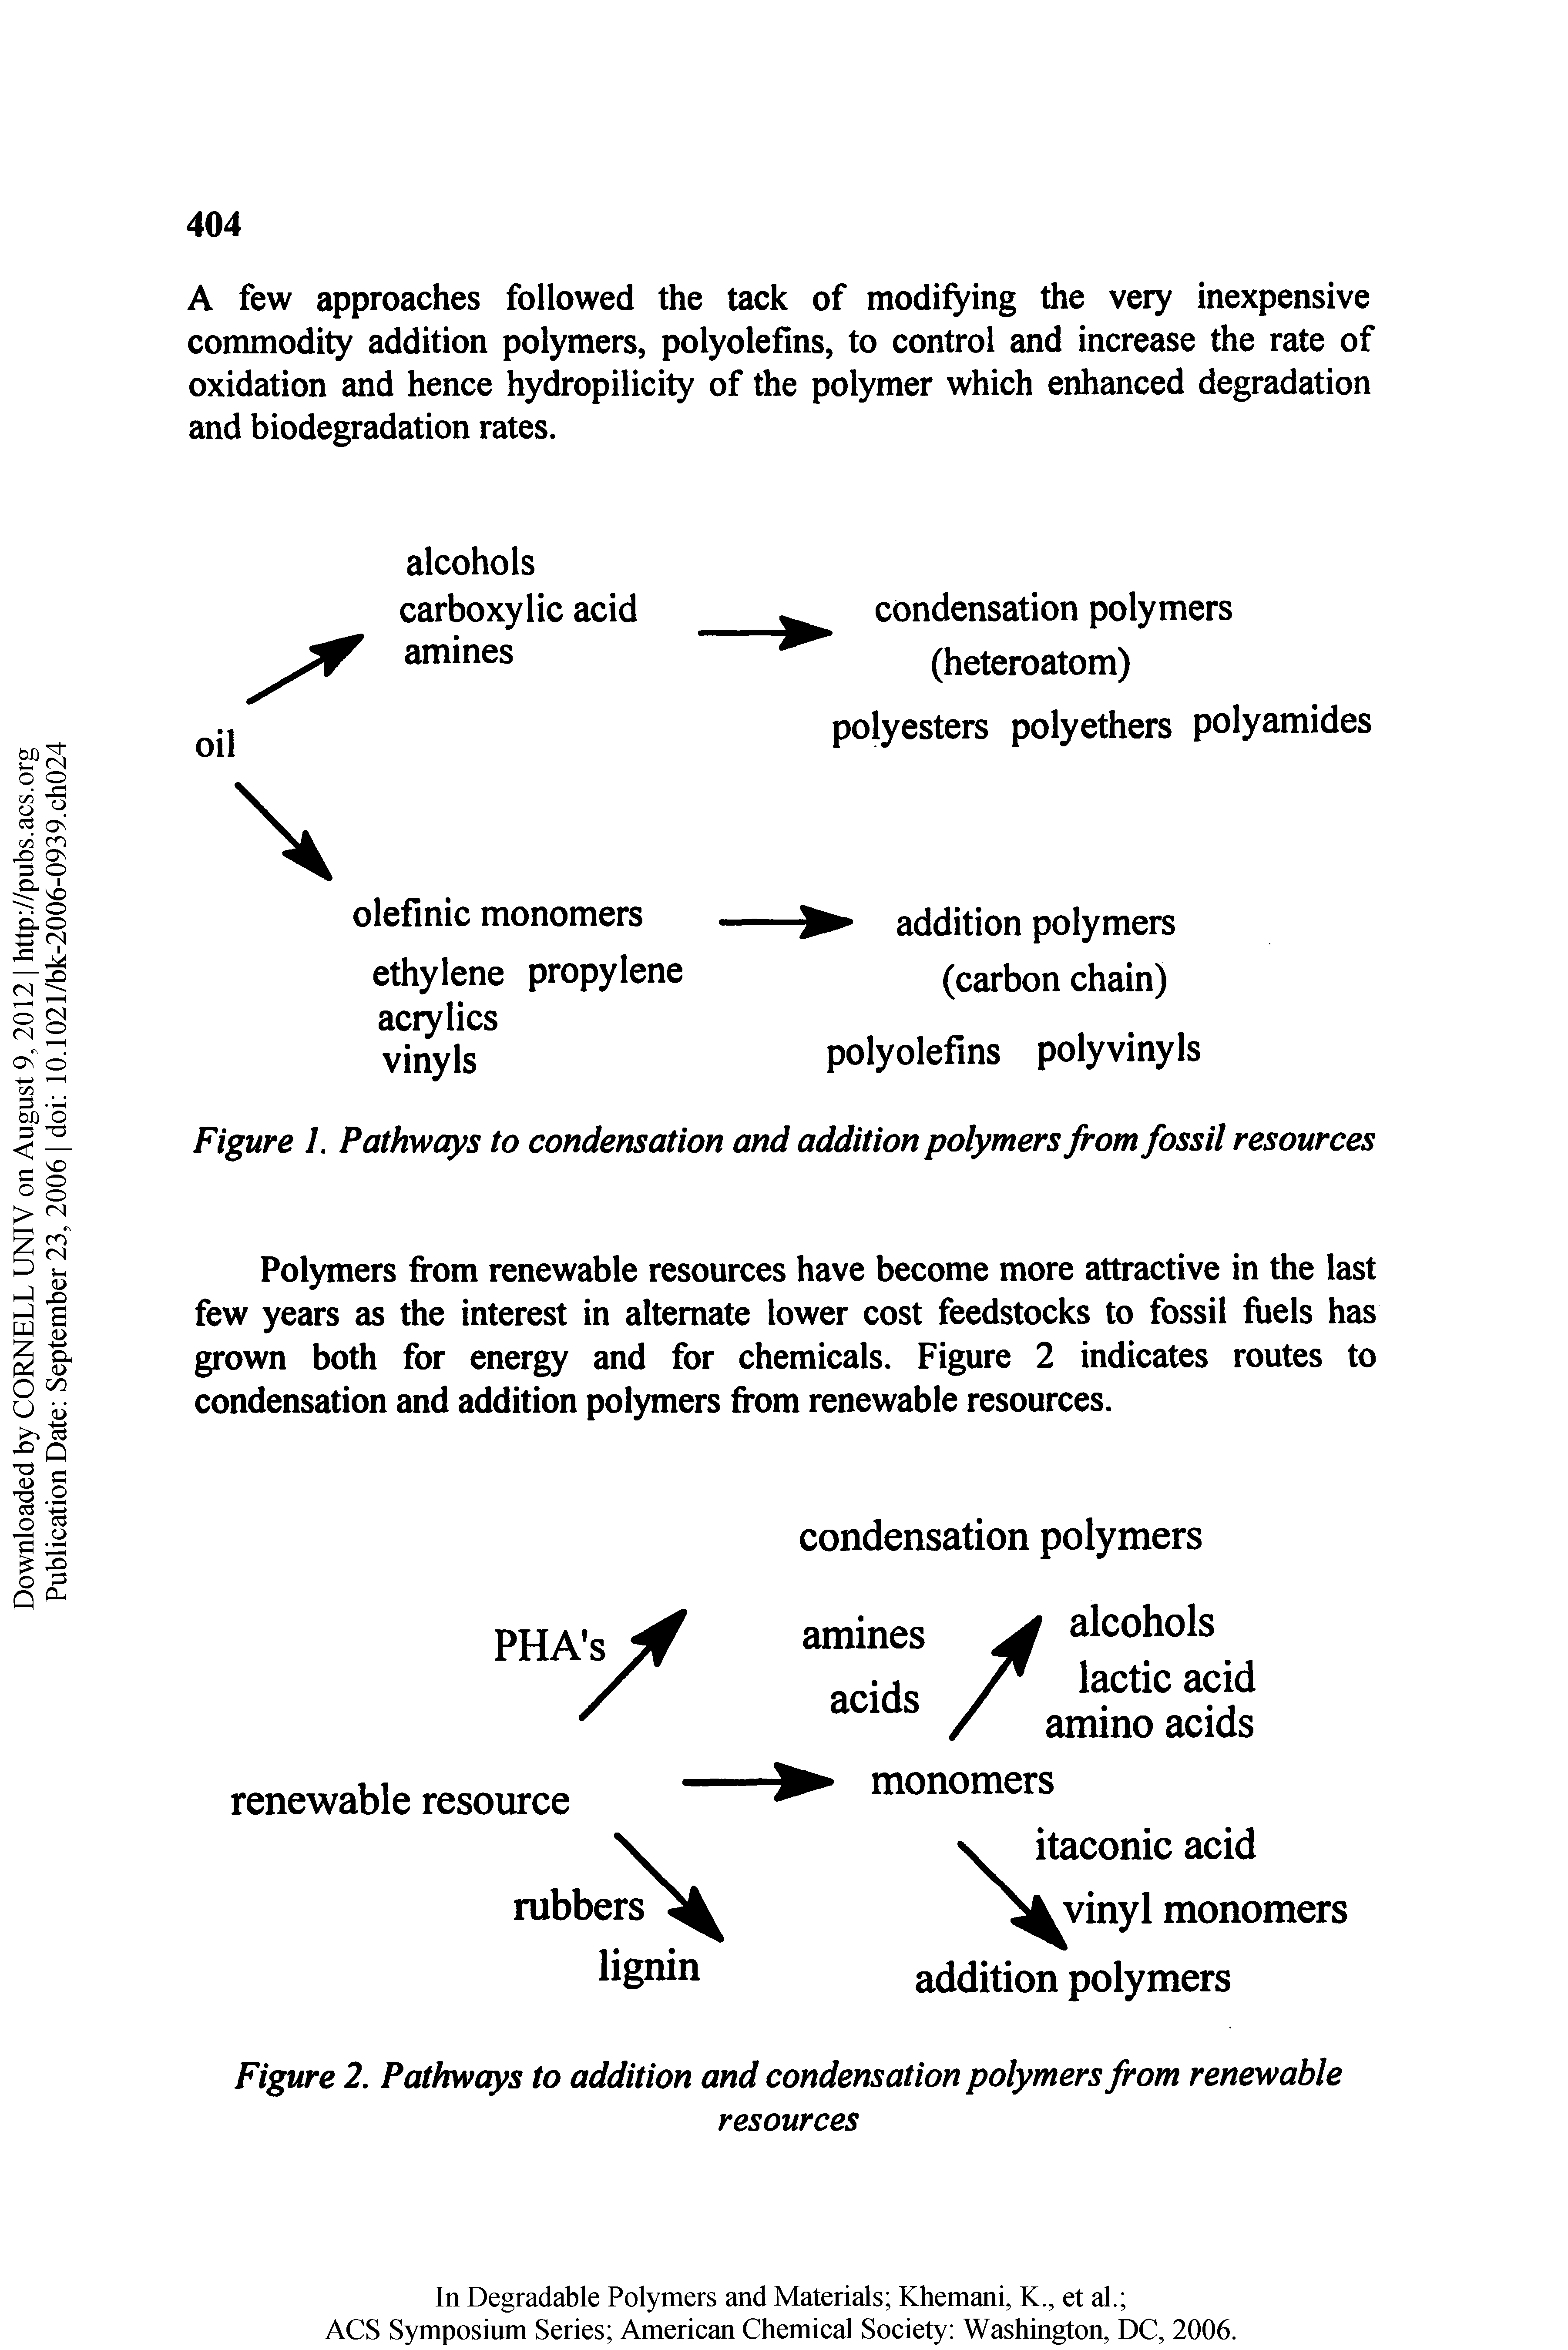 Figure 1. Pathways to condensation and addition polymers from fossil resources...